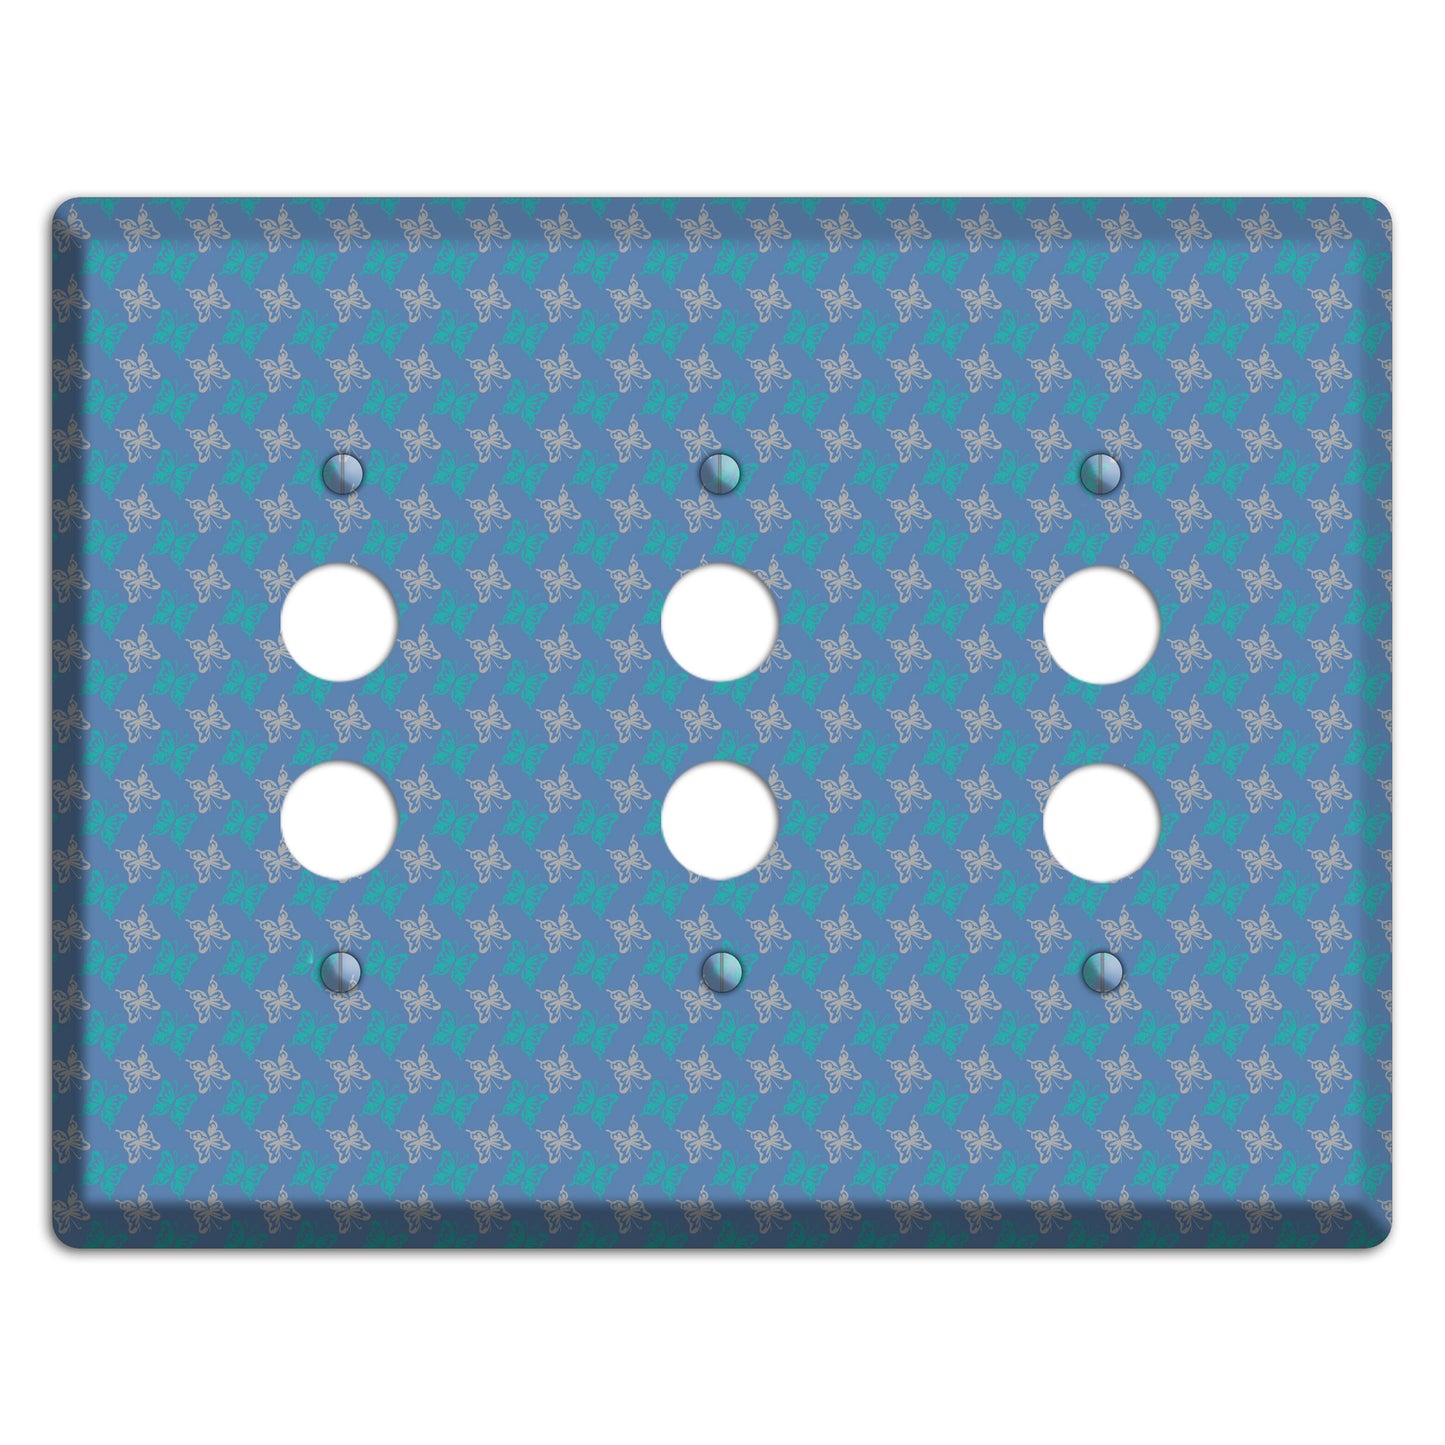 Blue with White and Turquoise Butterflies 3 Pushbutton Wallplate